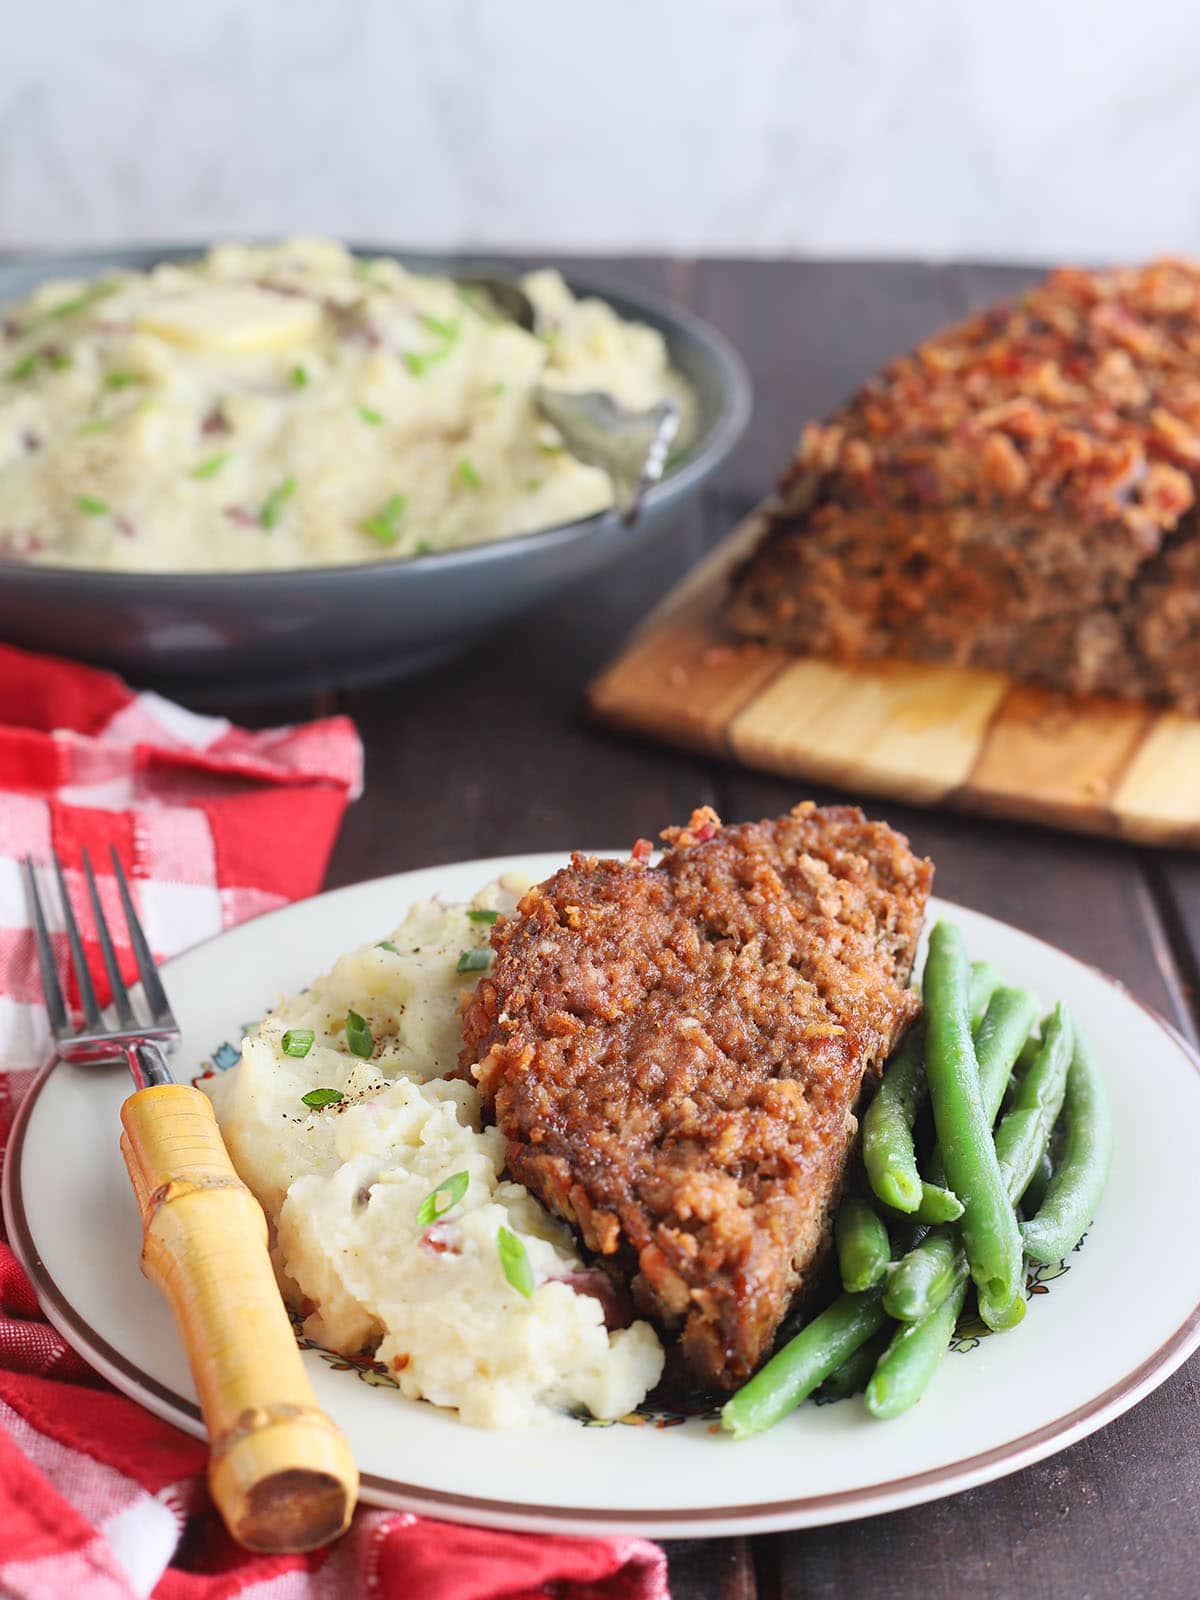 Slice of BBQ meatloaf on a plate with mashed potatoes and green beans.